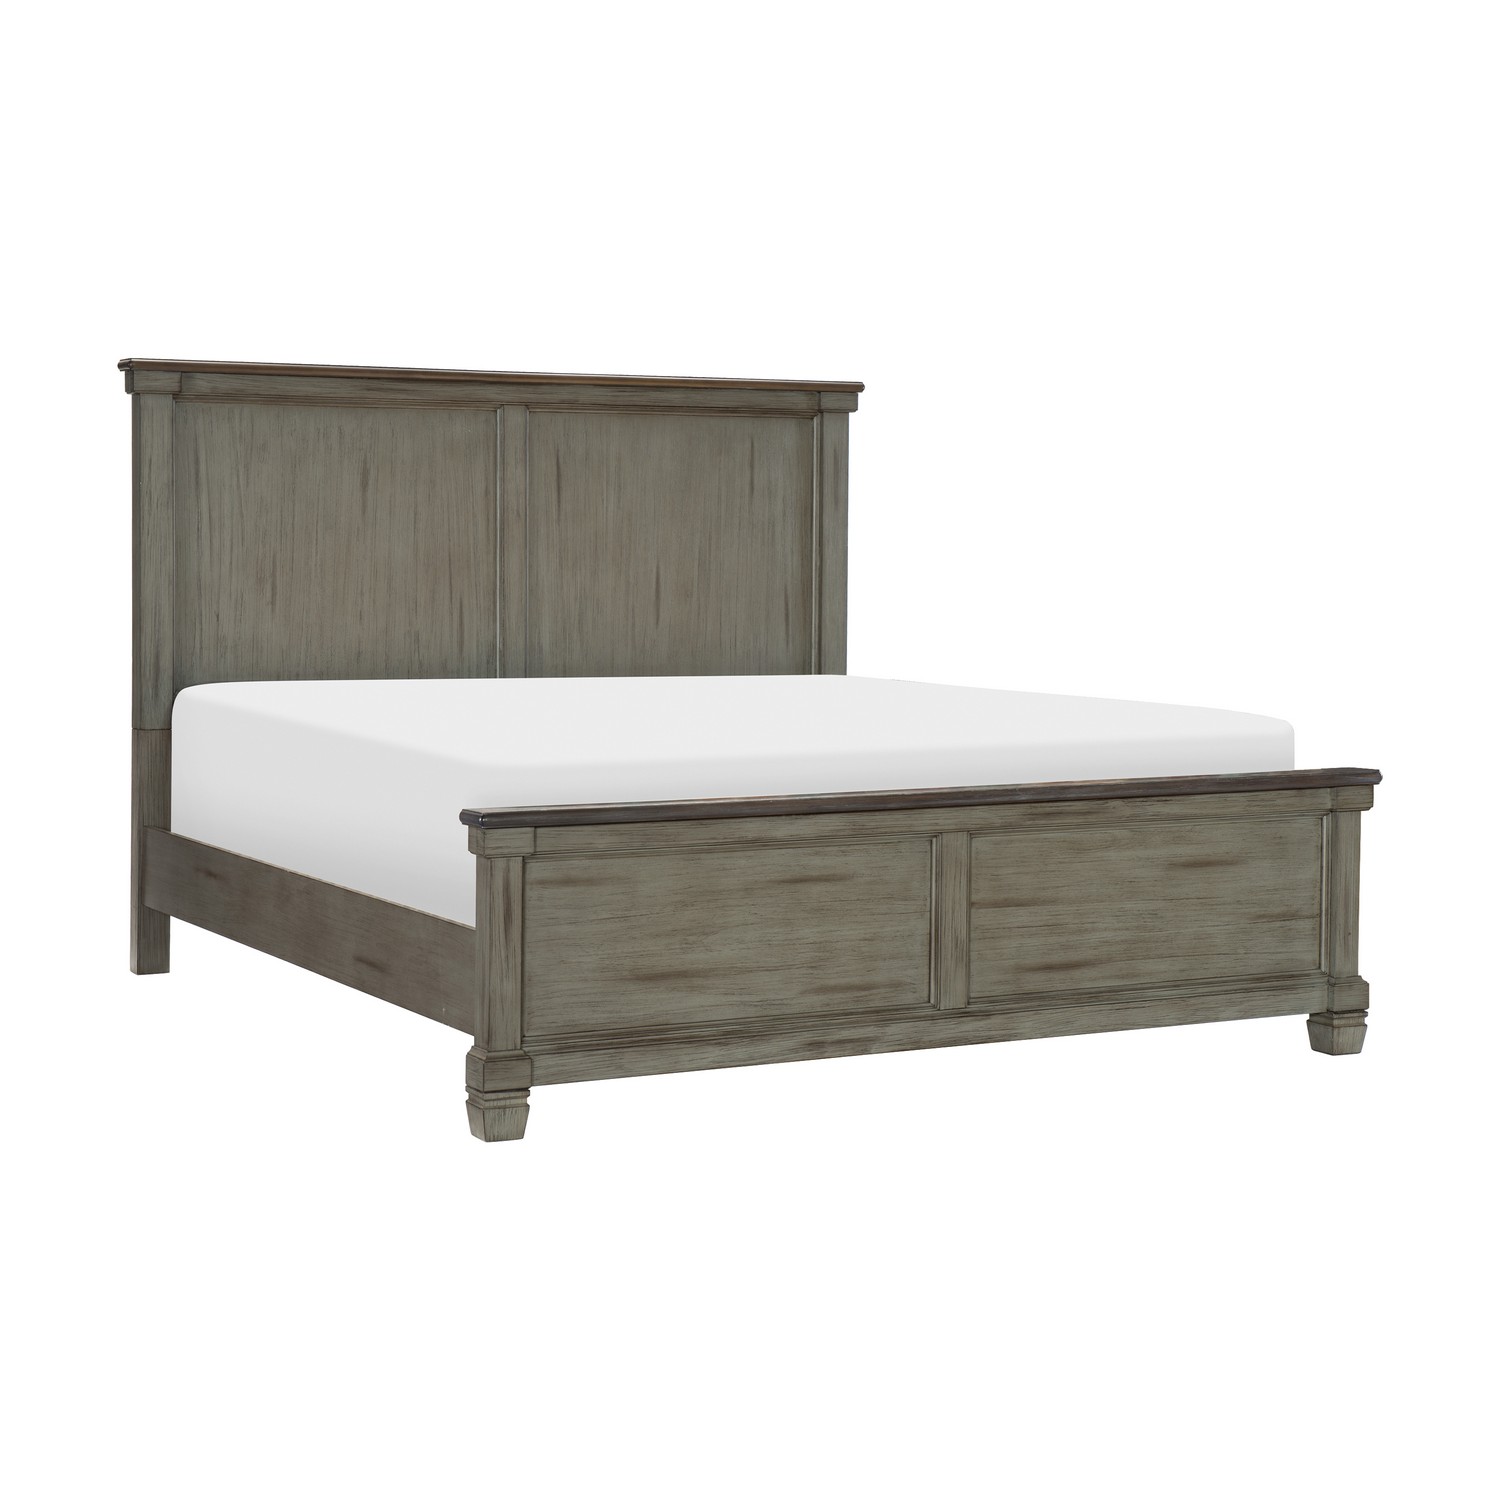 Homelegance Weaver Bed - Two-tone : Antique Gray And Coffee